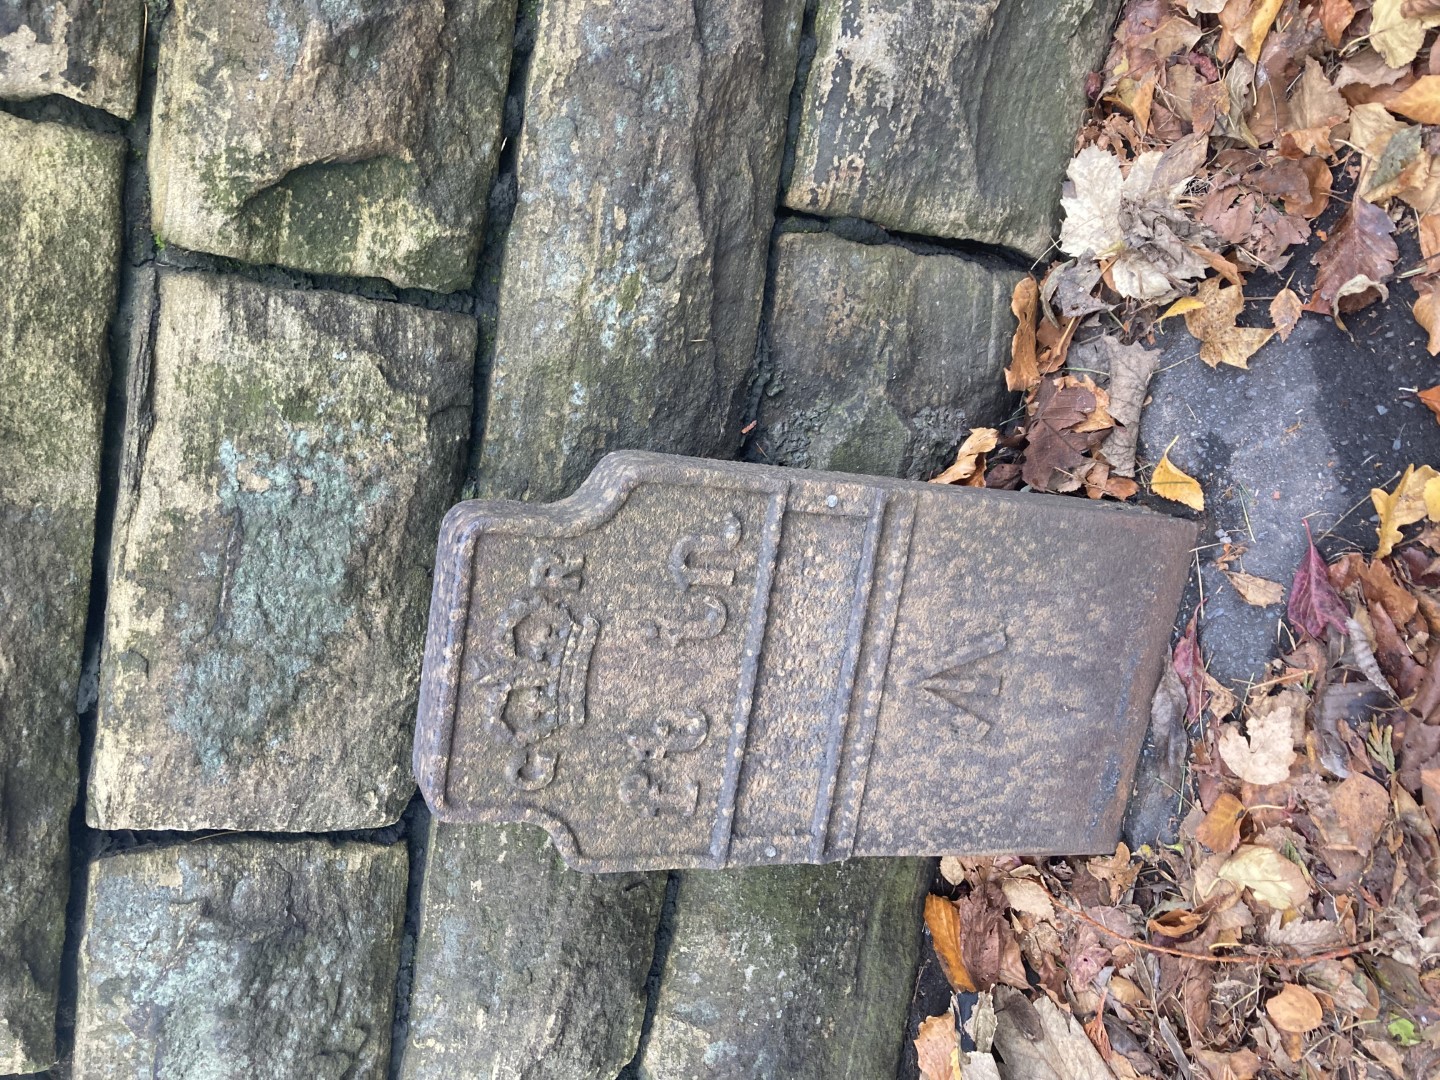 Telegraph cable marker post at 266 Washway Road, Sale, Manchester by Tony Shaw 